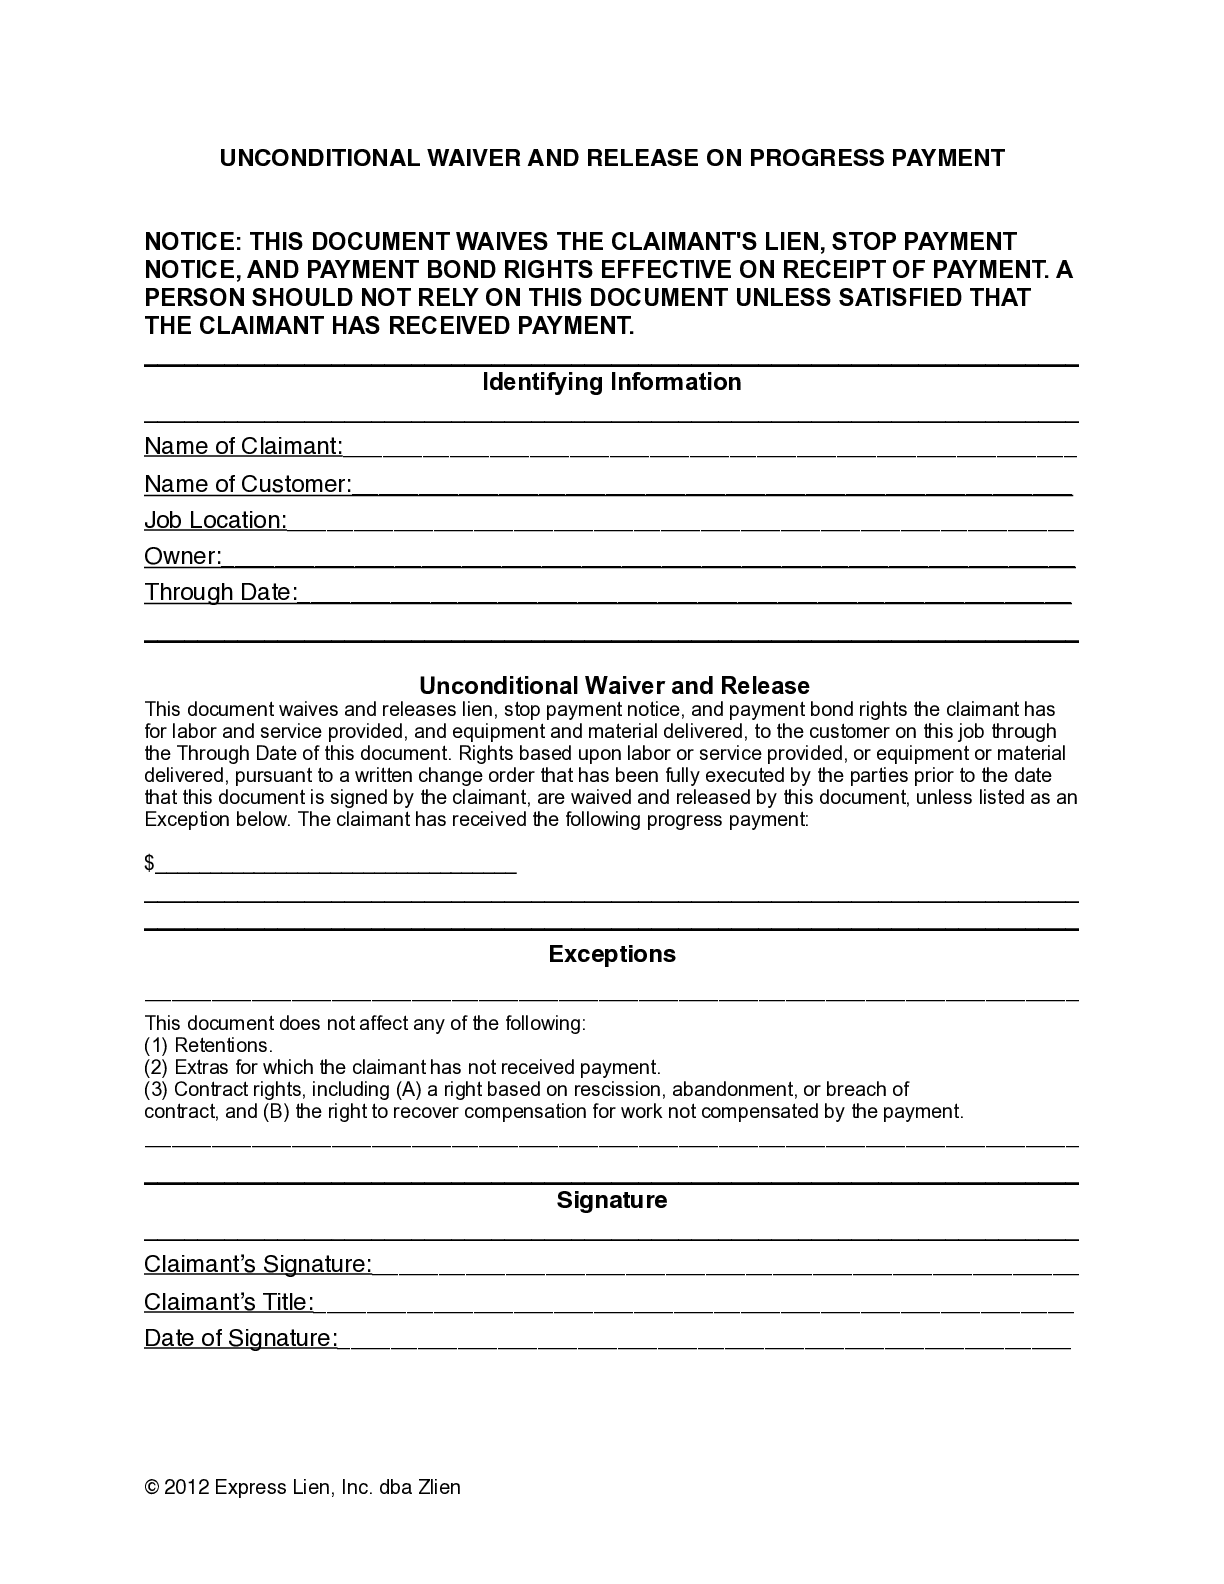 Oklahoma Partial Unconditional Lien Waiver Form - free from